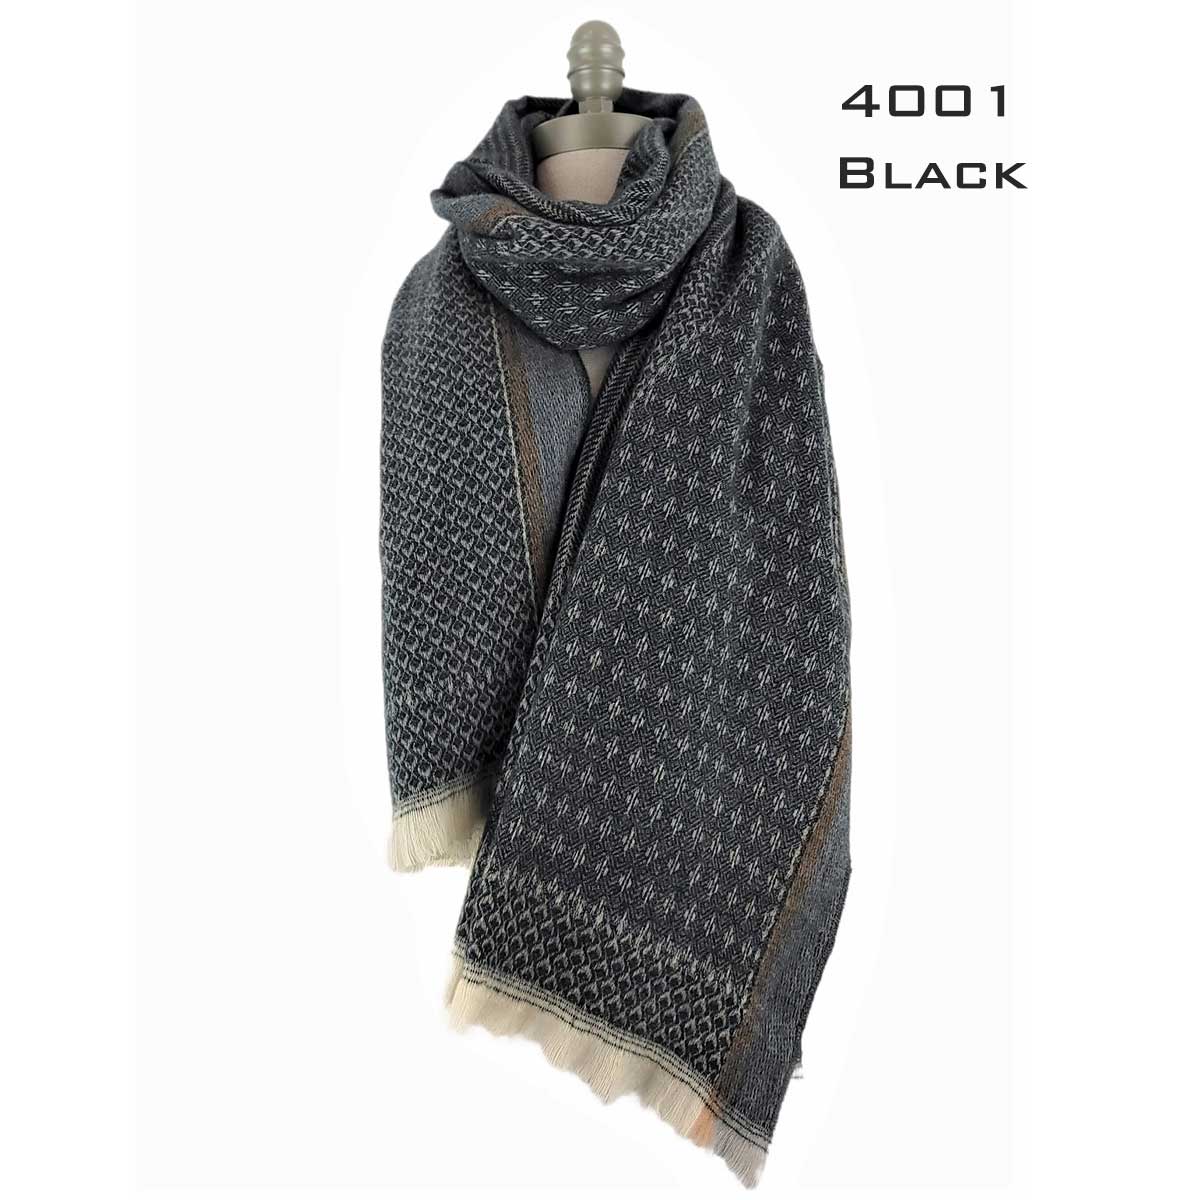 4001 - Cashmere Touch Printed Shawl 4001 - Black<br> 
Cashmere Touch Printed Shawl - 27